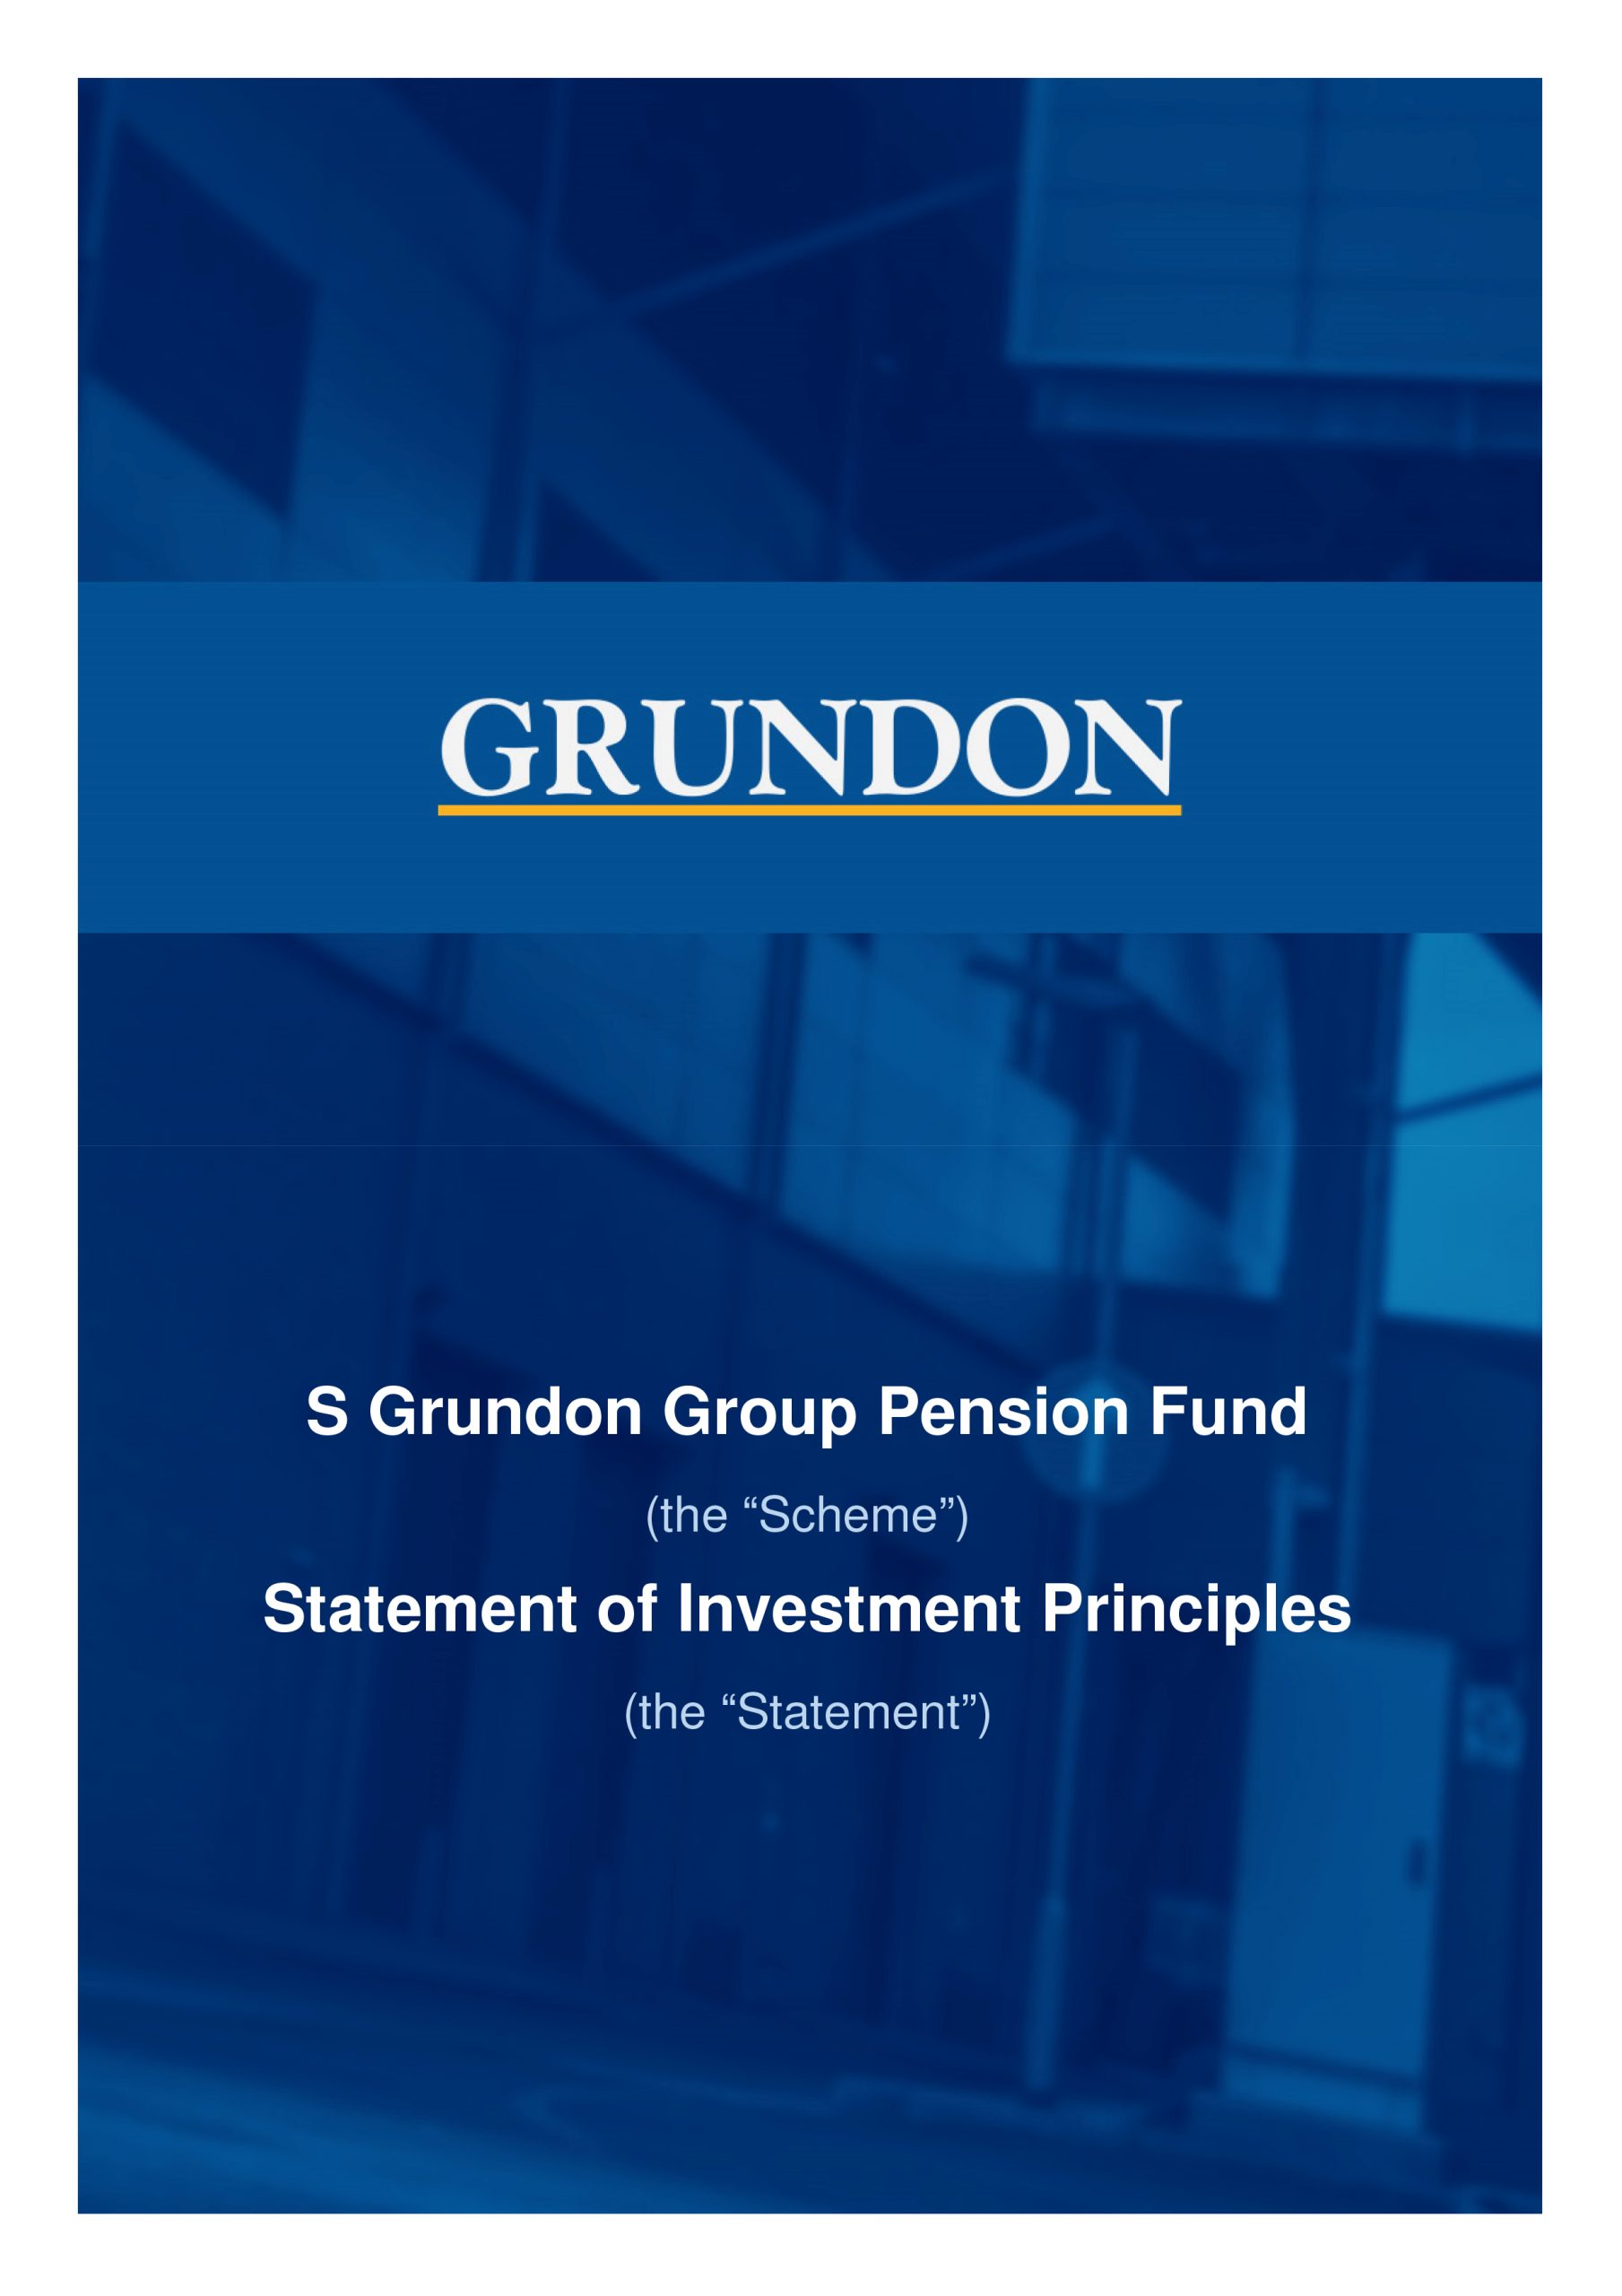 Pension Investment Principles